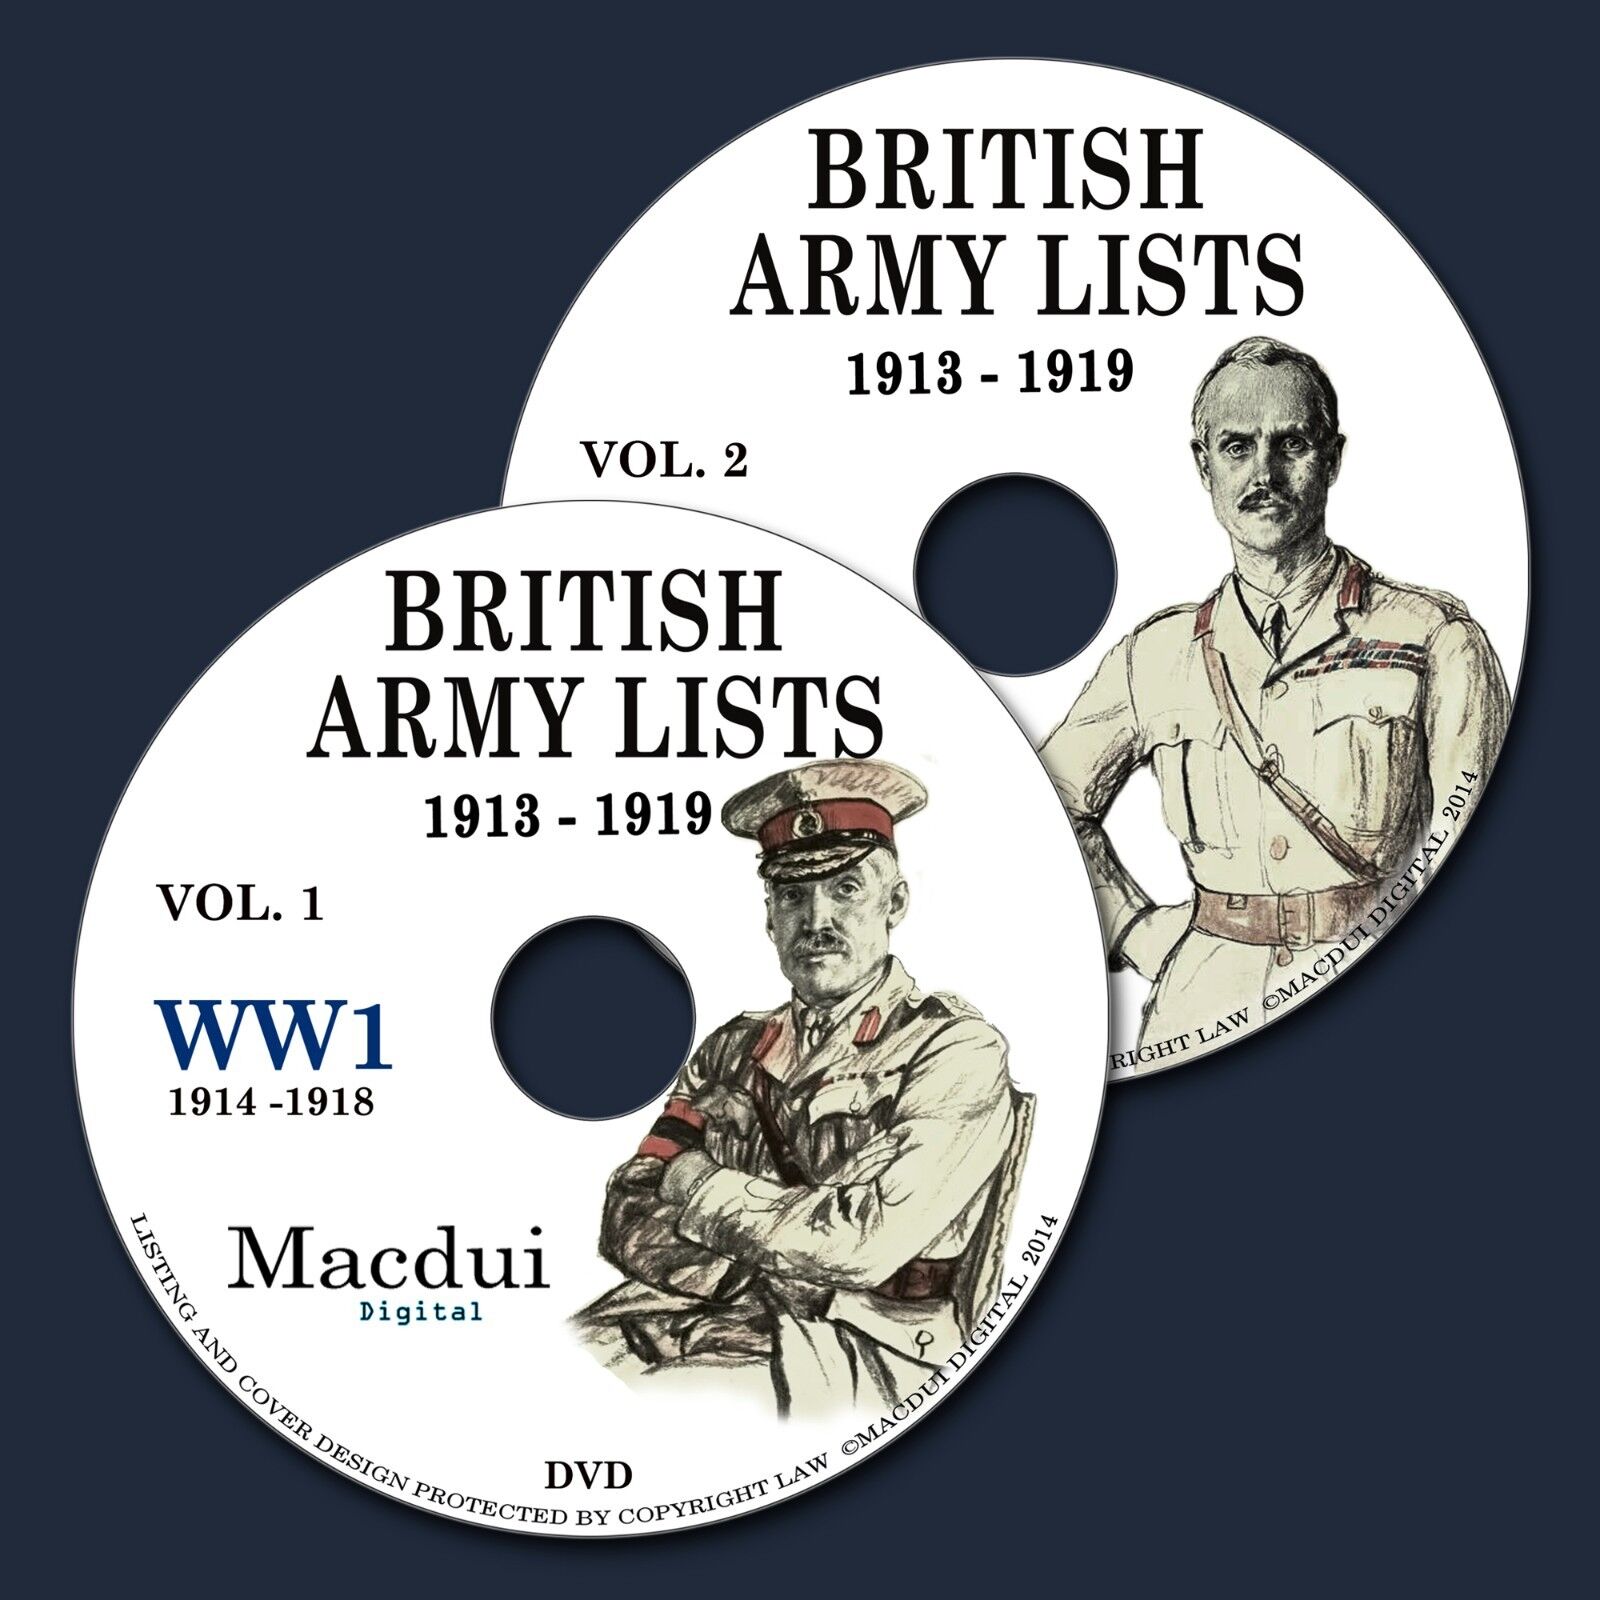 British Army Lists 1913-1919 incl. WW1 (1914-1918) E-book 65 Parts on 2 DVD PDF 